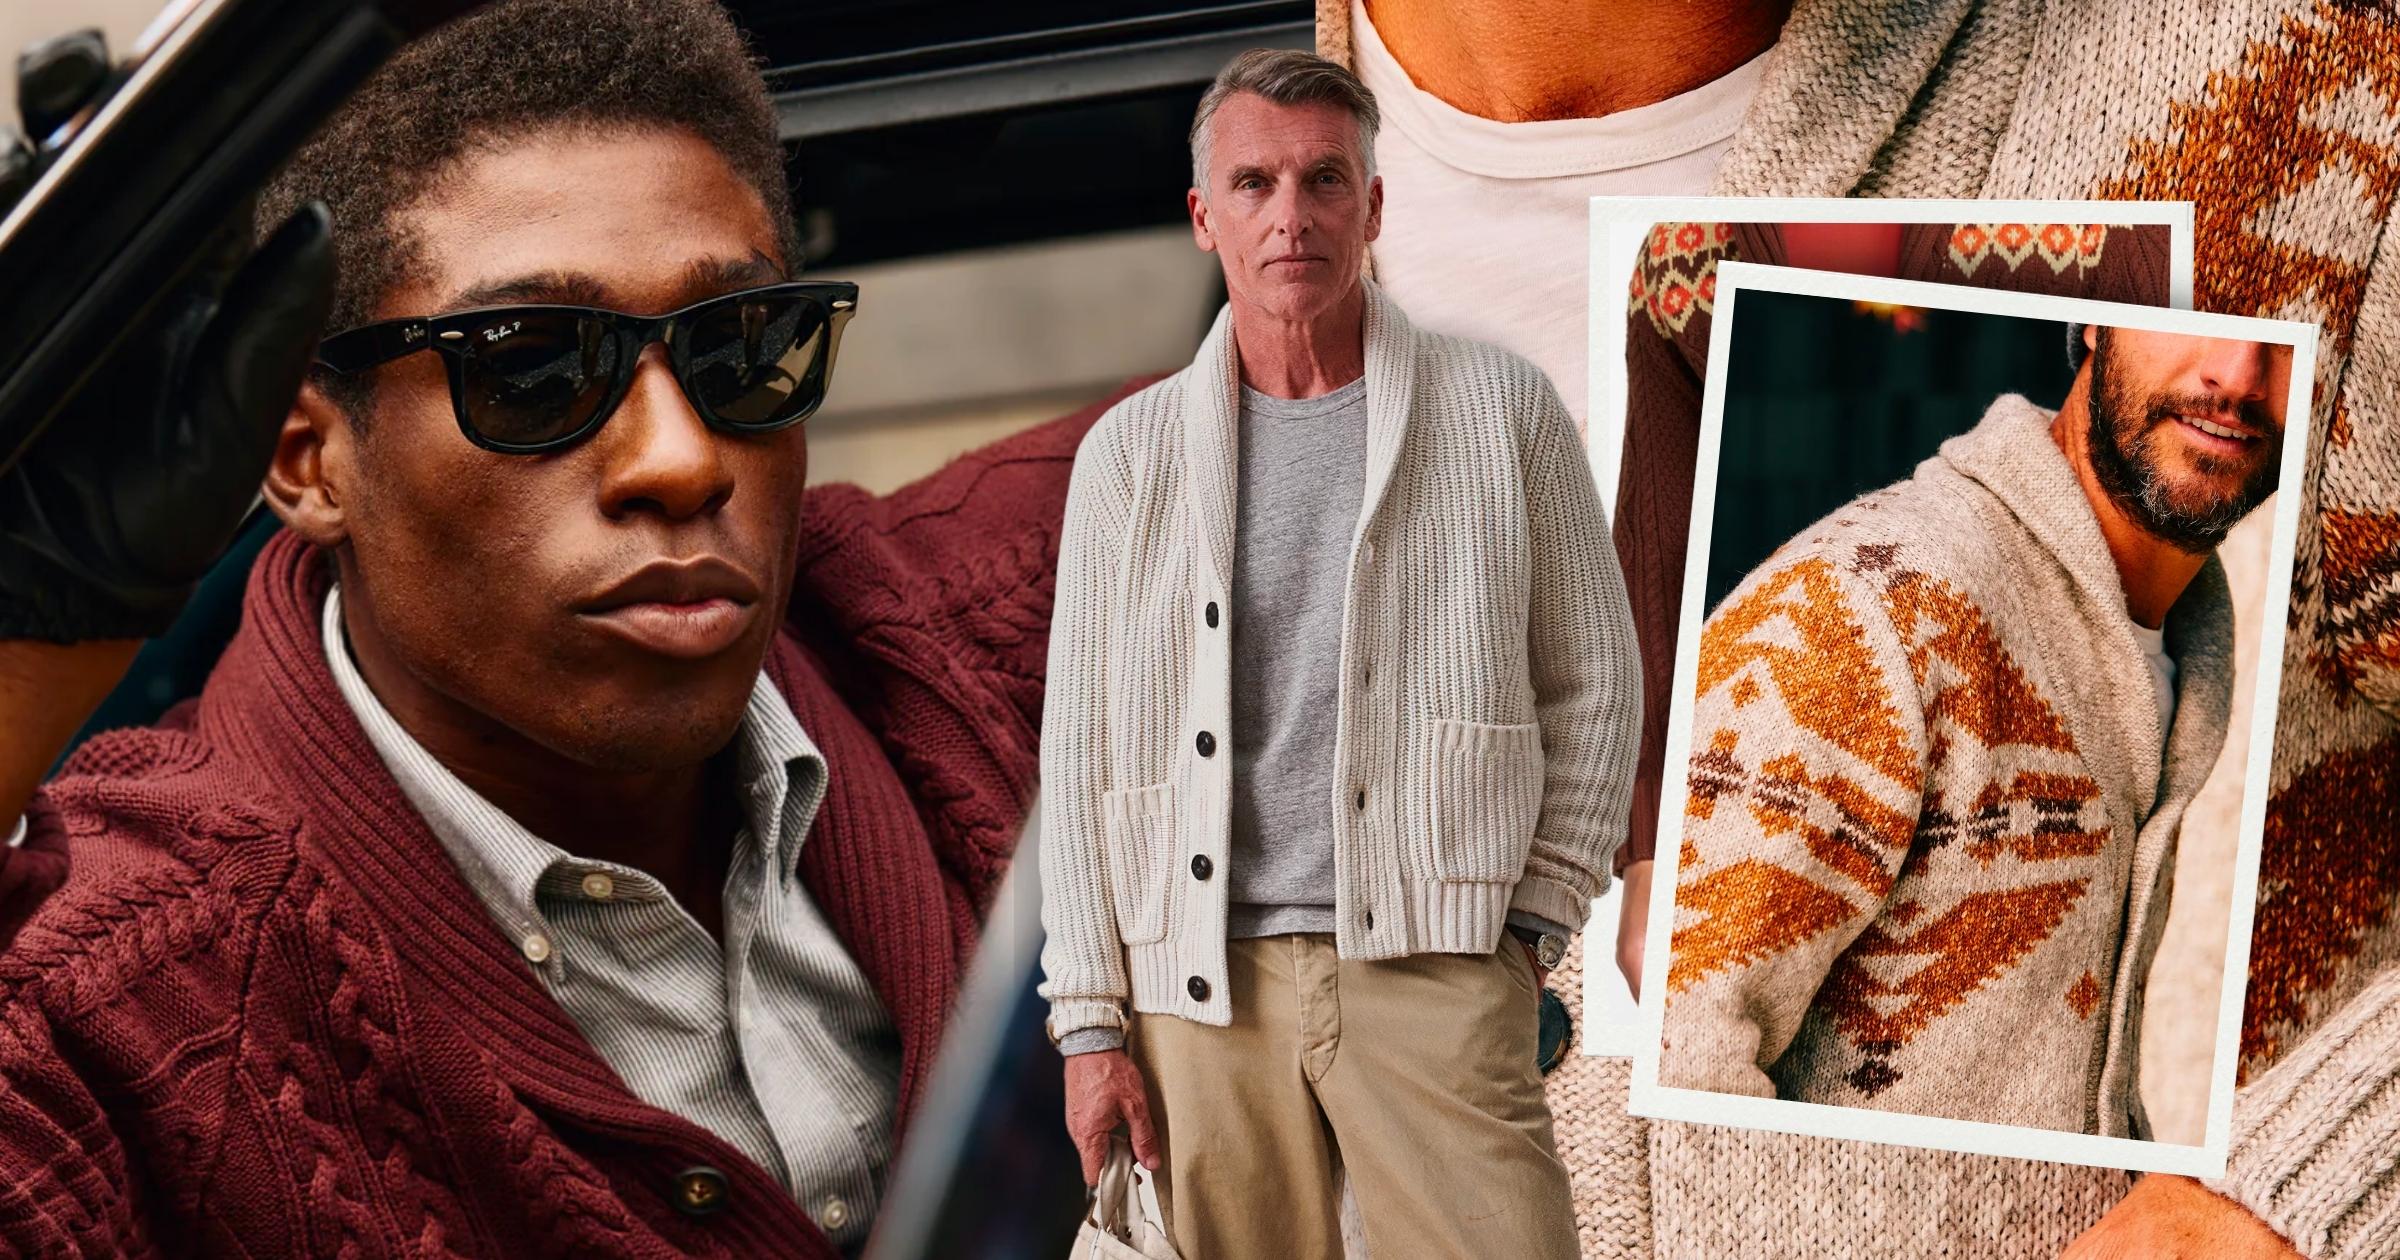 12 Of The Best Shawl Collar Cardigan Sweaters We Can’t Wait to Wear Every Fall & Winter